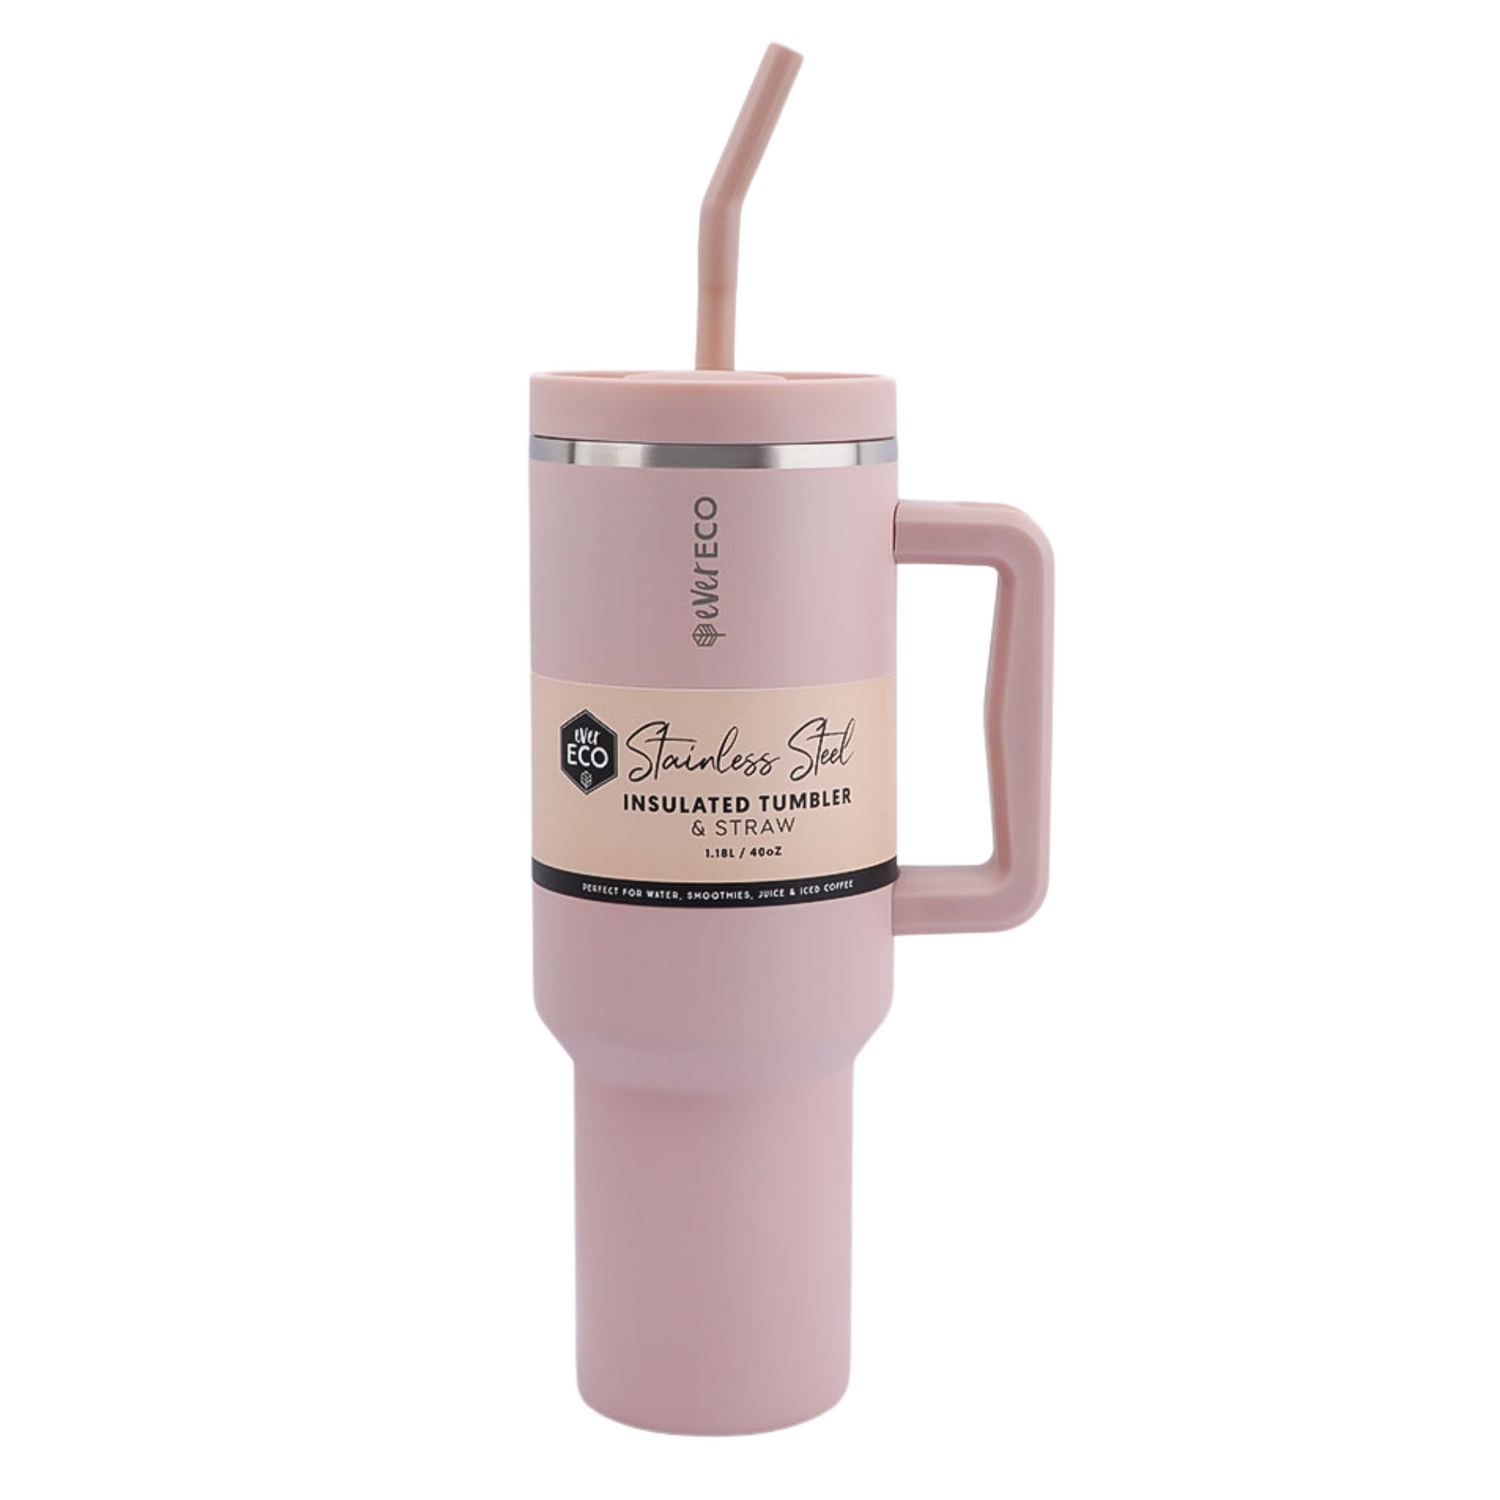 Ever Eco Insulated Tumbler Rose - 1.18L